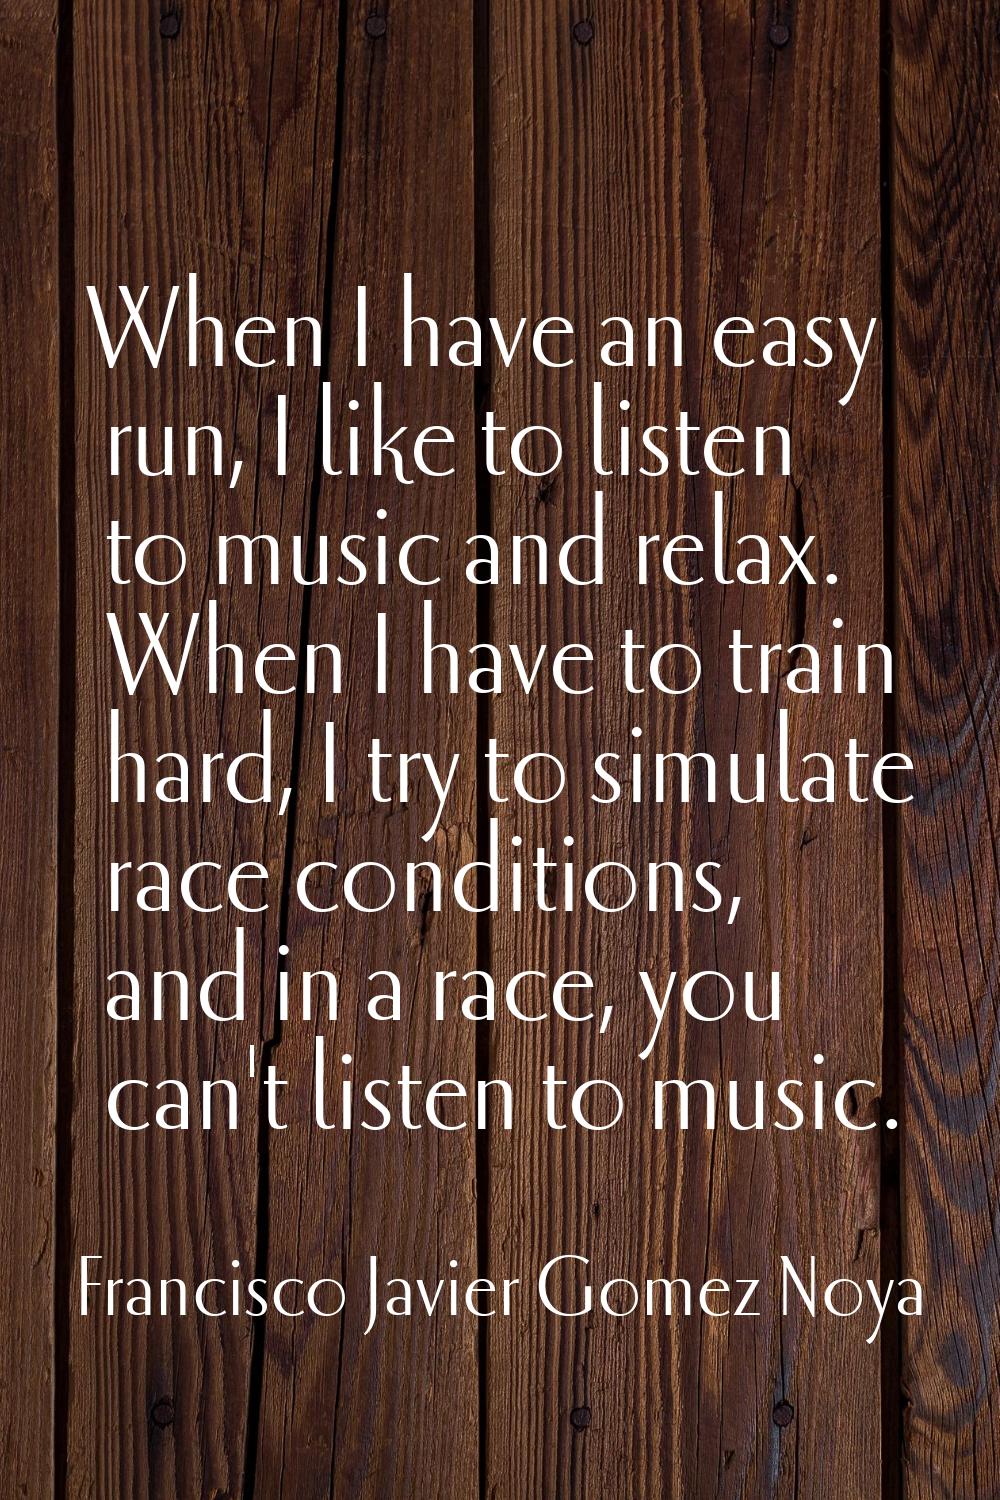 When I have an easy run, I like to listen to music and relax. When I have to train hard, I try to s